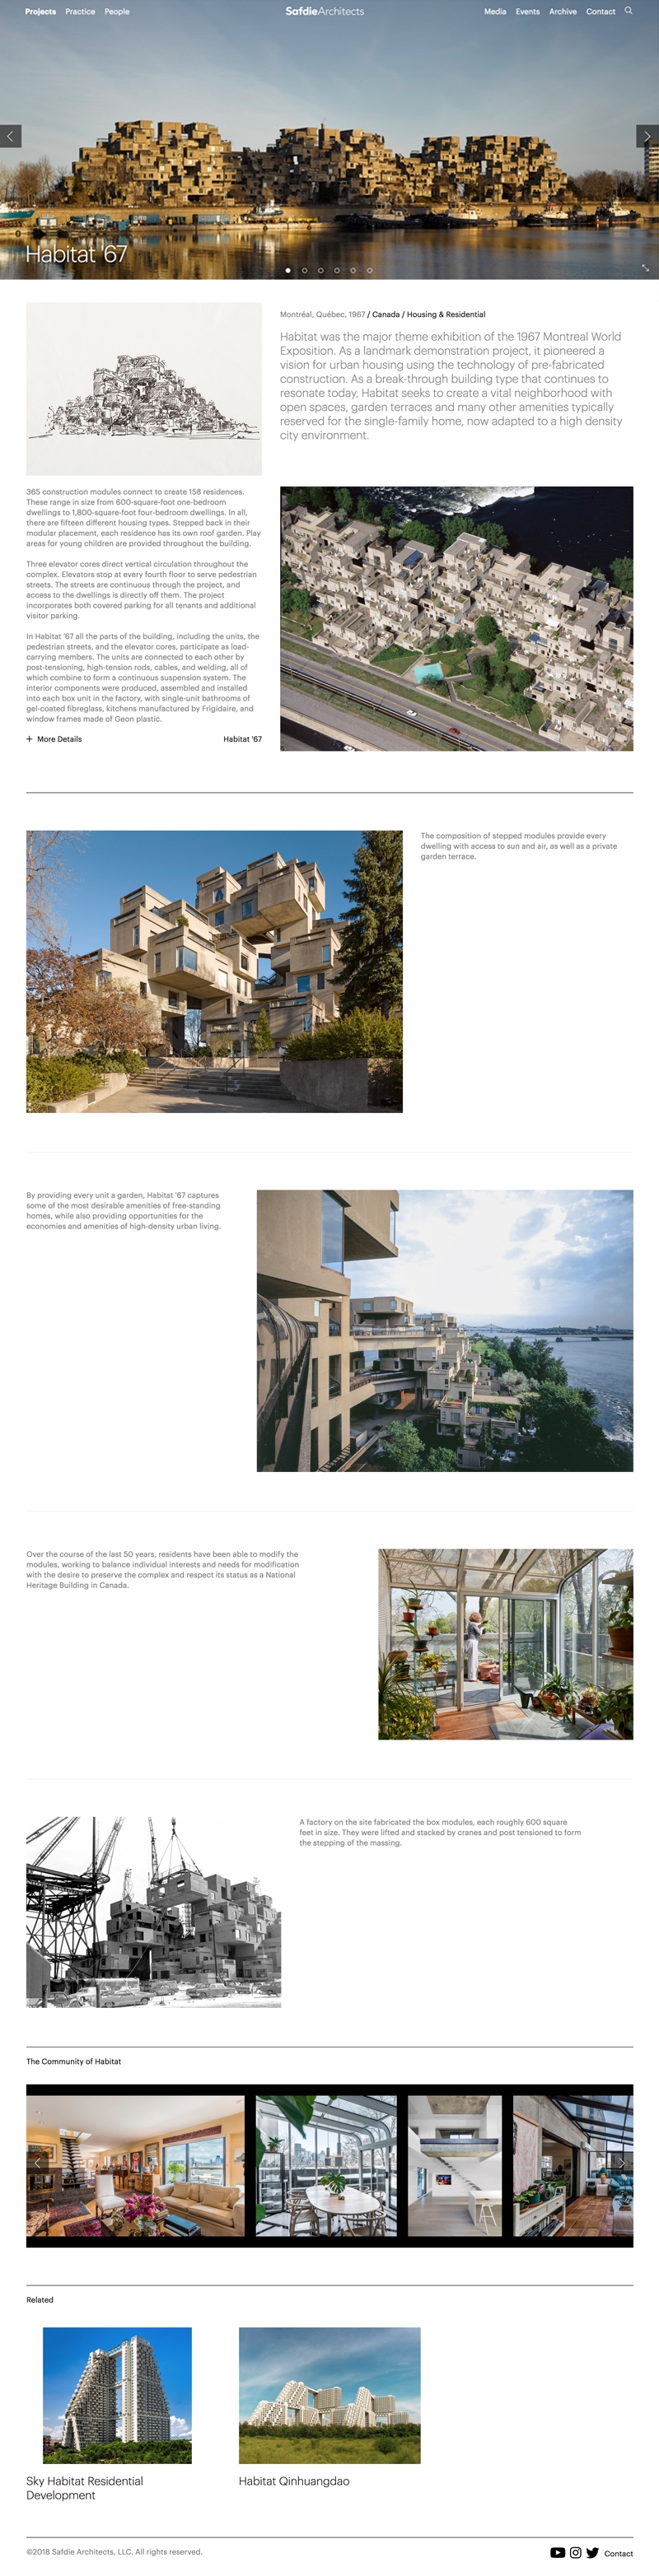 Case study example from Safdie Architects